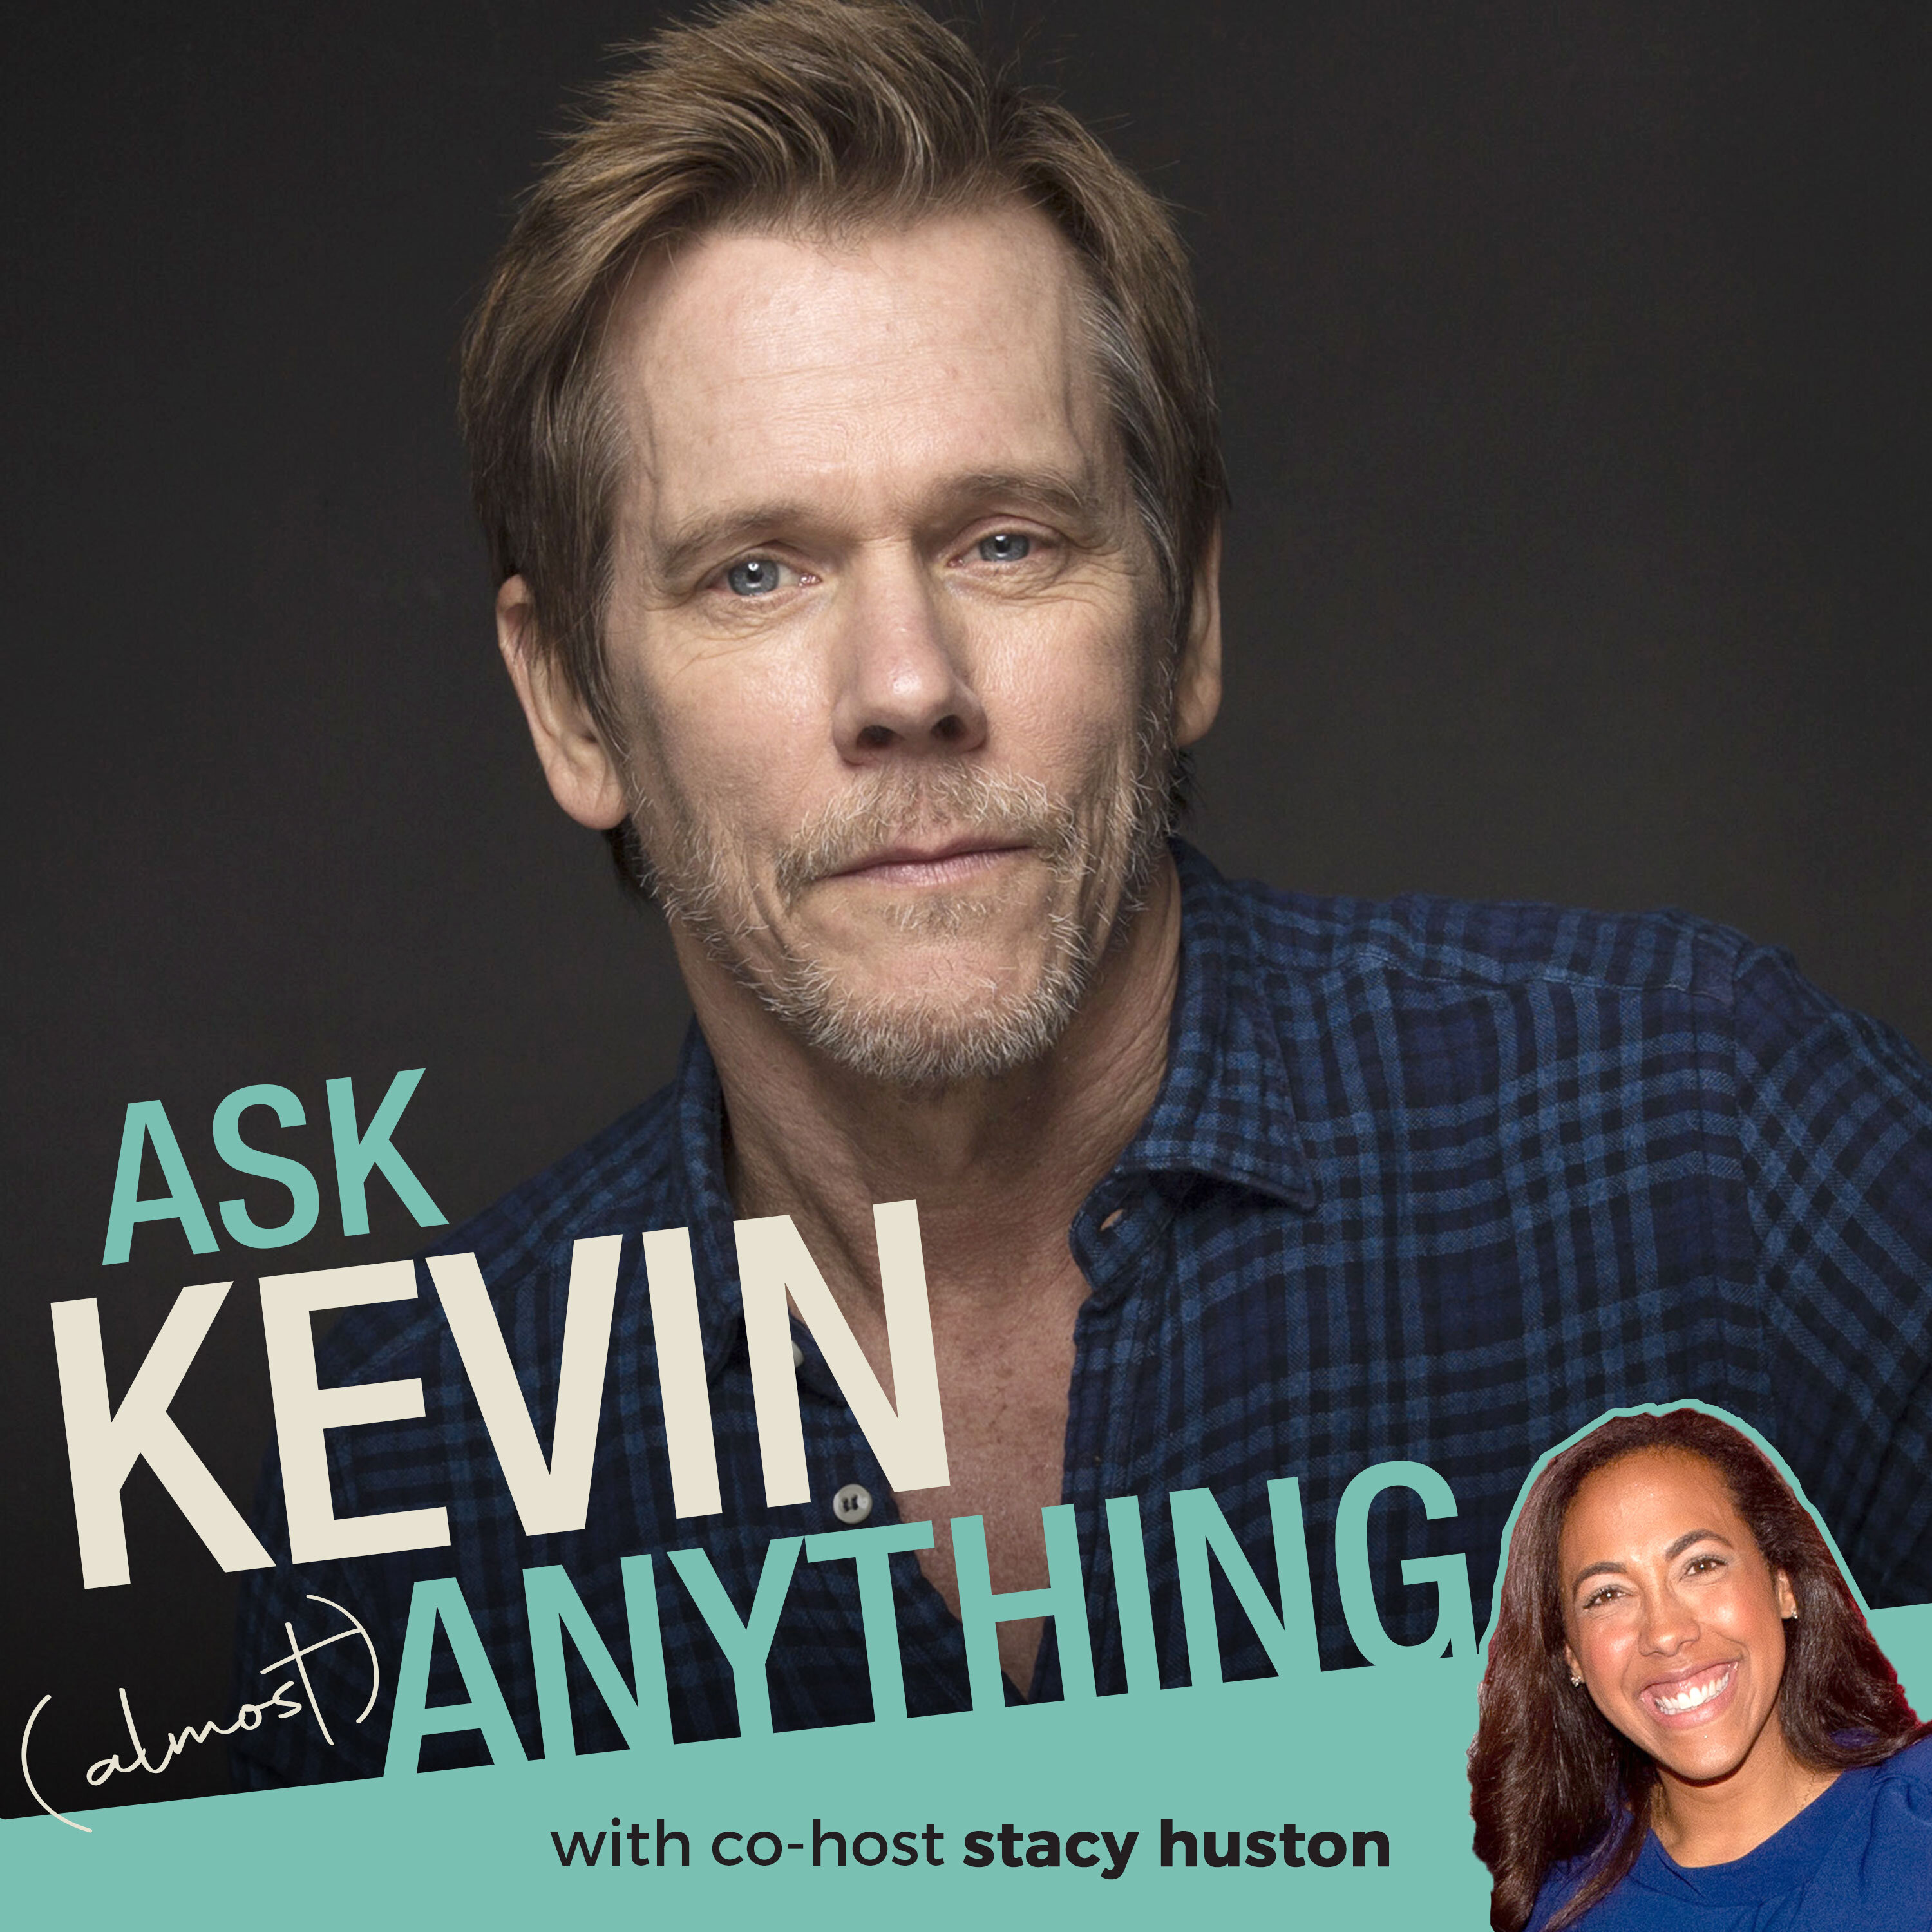 Ask Kevin (Almost) Anything! Animal Therapy, Going Vegan, and the Importance of The Arts For Kids